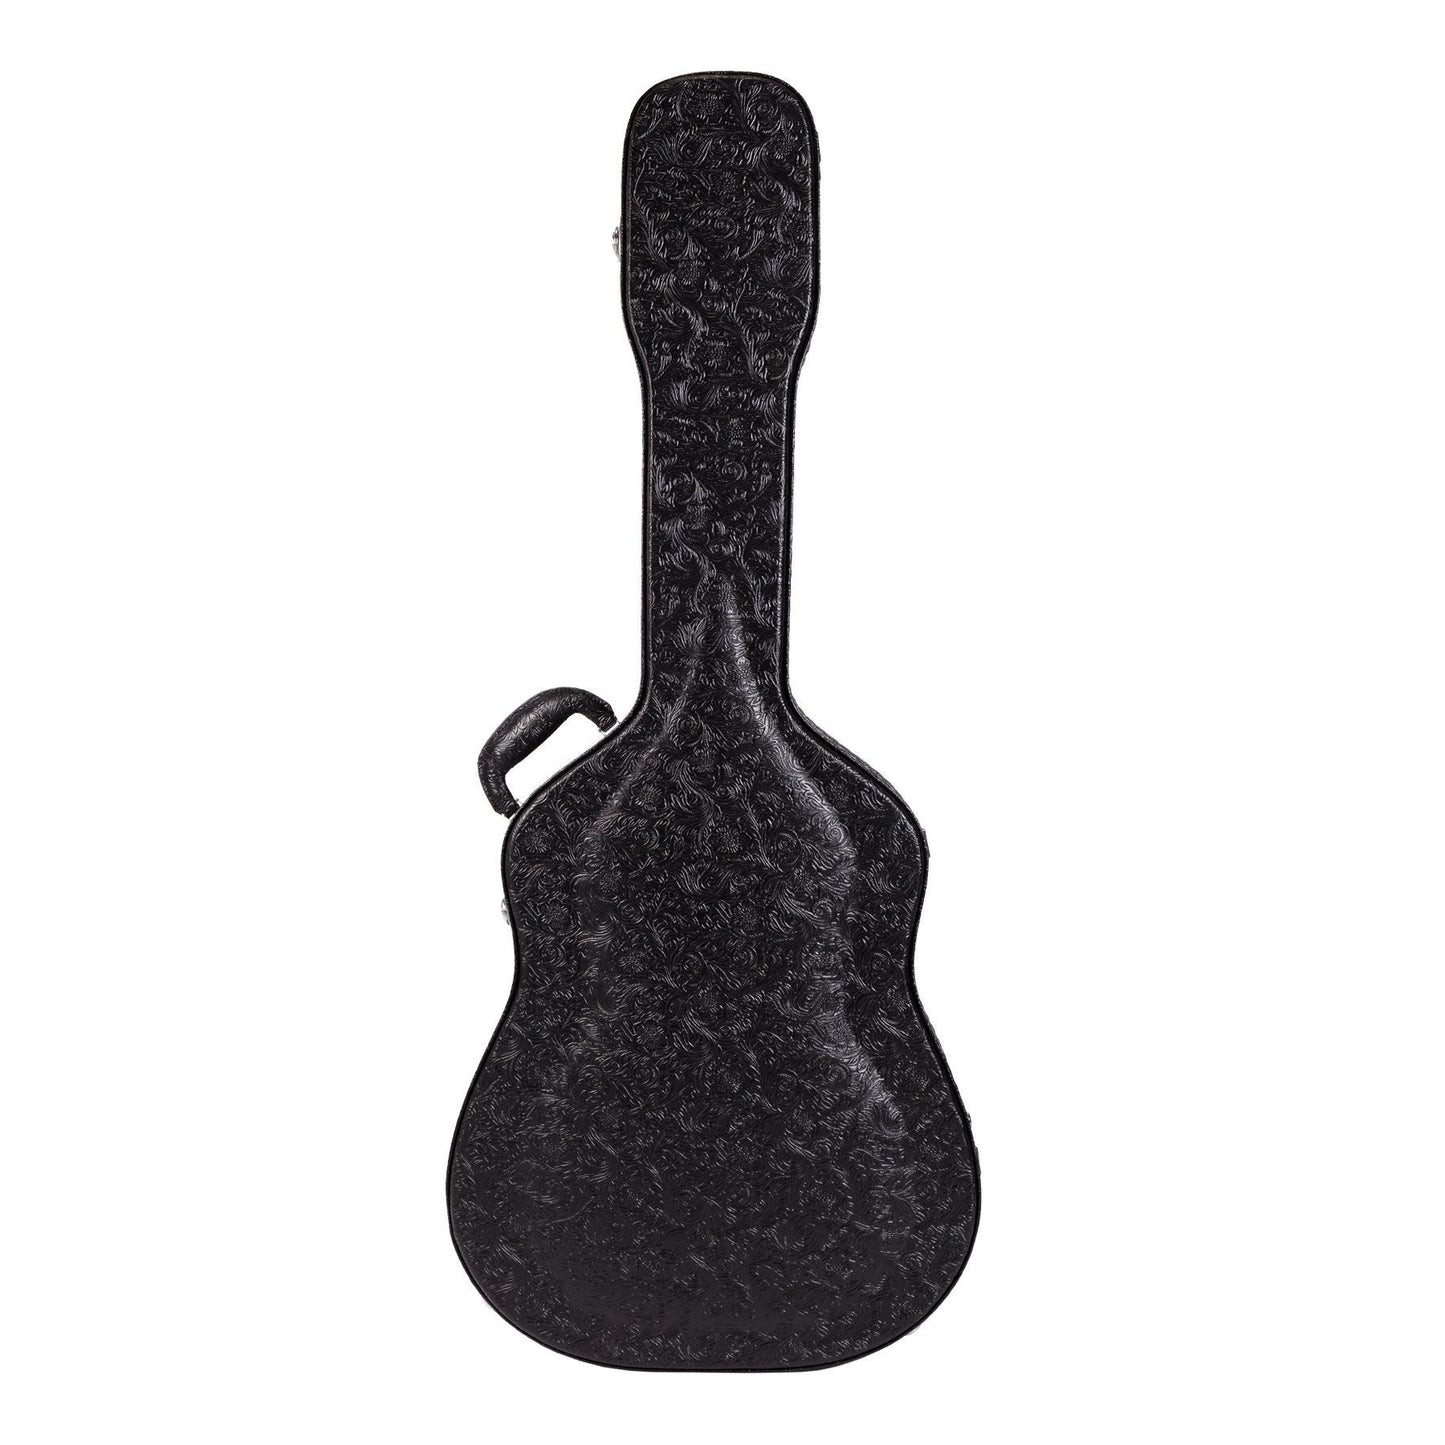 Crossfire Deluxe Shaped 12-String Acoustic Guitar Hard Case (Paisley Black)